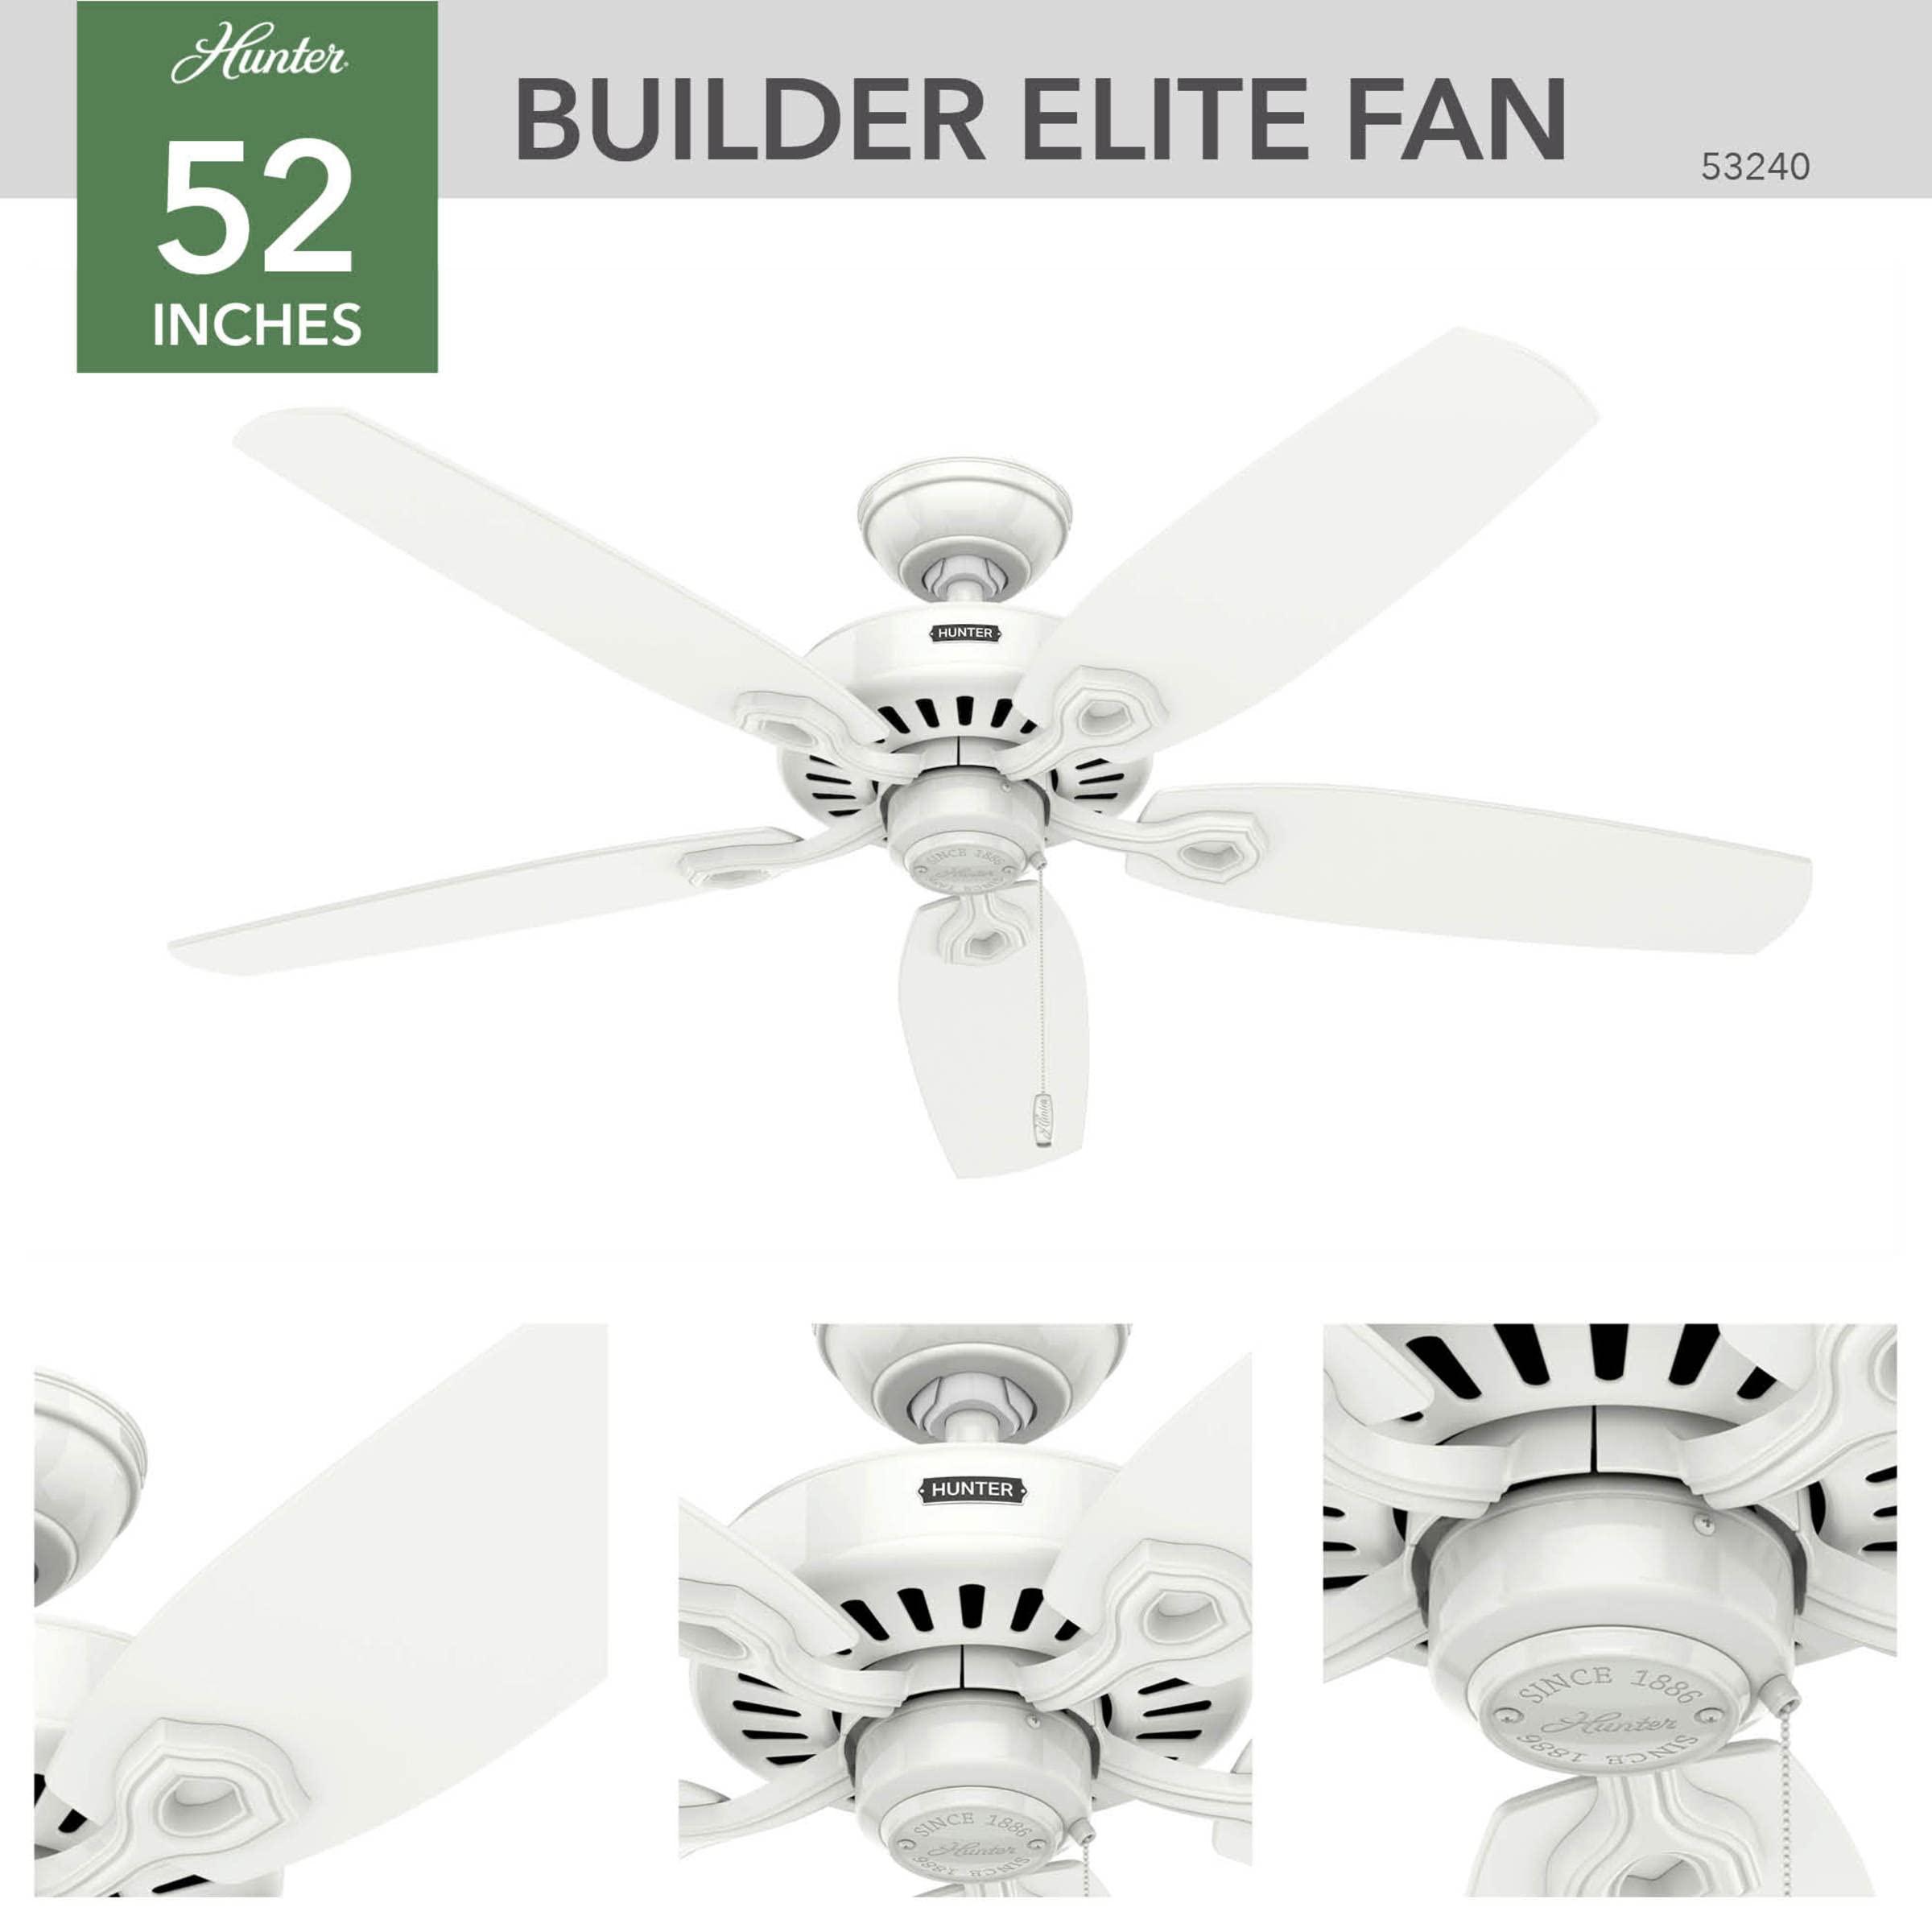 Hunter Fan Company 53240 Builder Elite Indoor Ceiling Fan with Pull Chain Control, 52